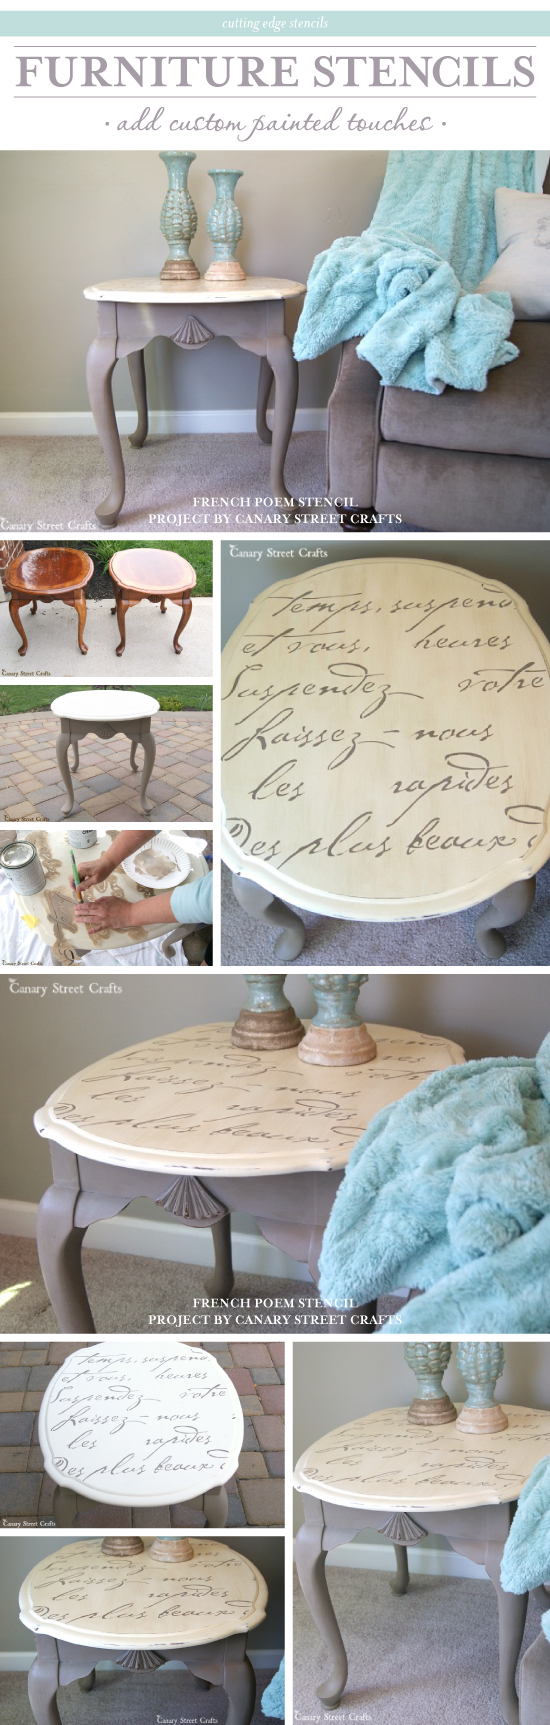 A DIY stenciled side table using the French Poem Allover stencil. http://www.cuttingedgestencils.com/french-poem-typography-letter-stencil.html